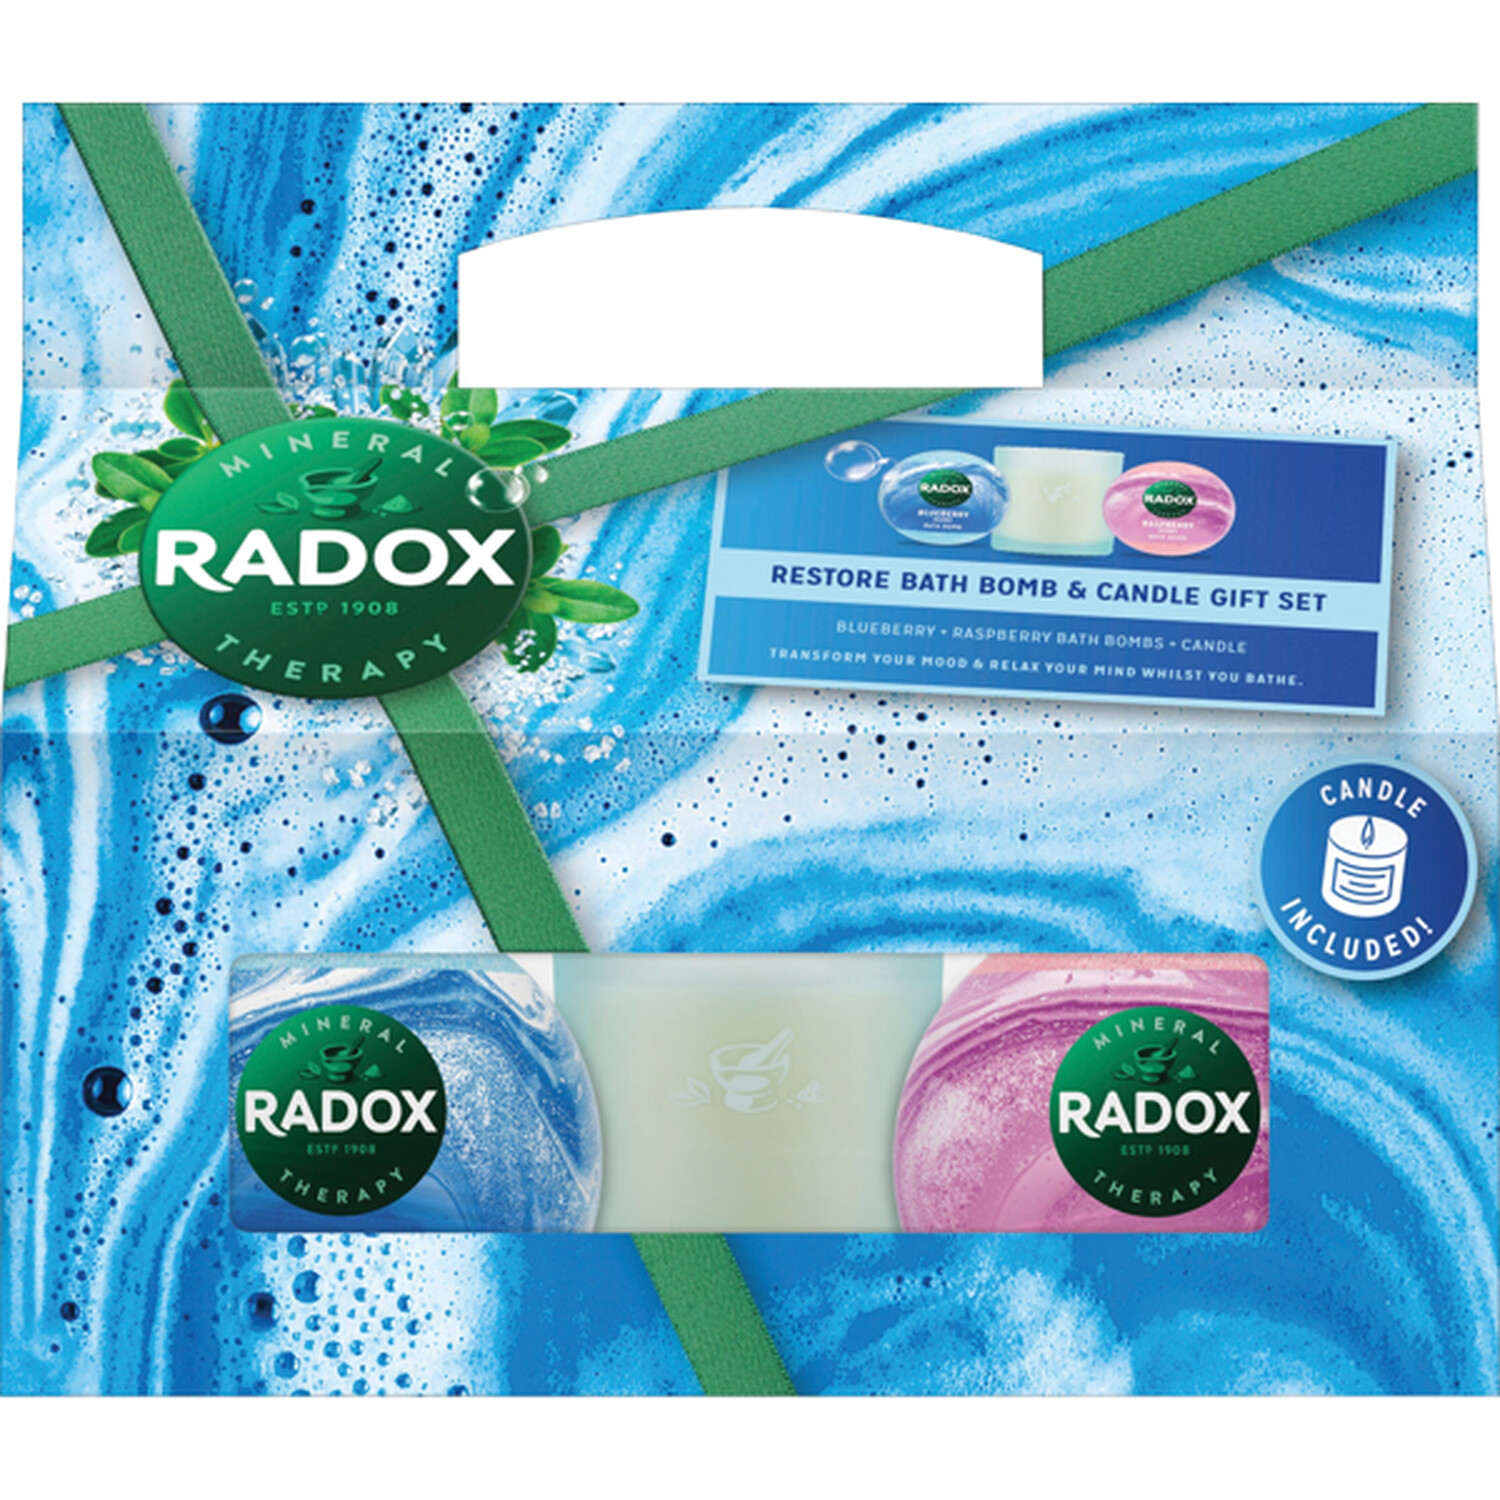 Radox Restore Bath Bomb and Candle Gift Set - Blue Image